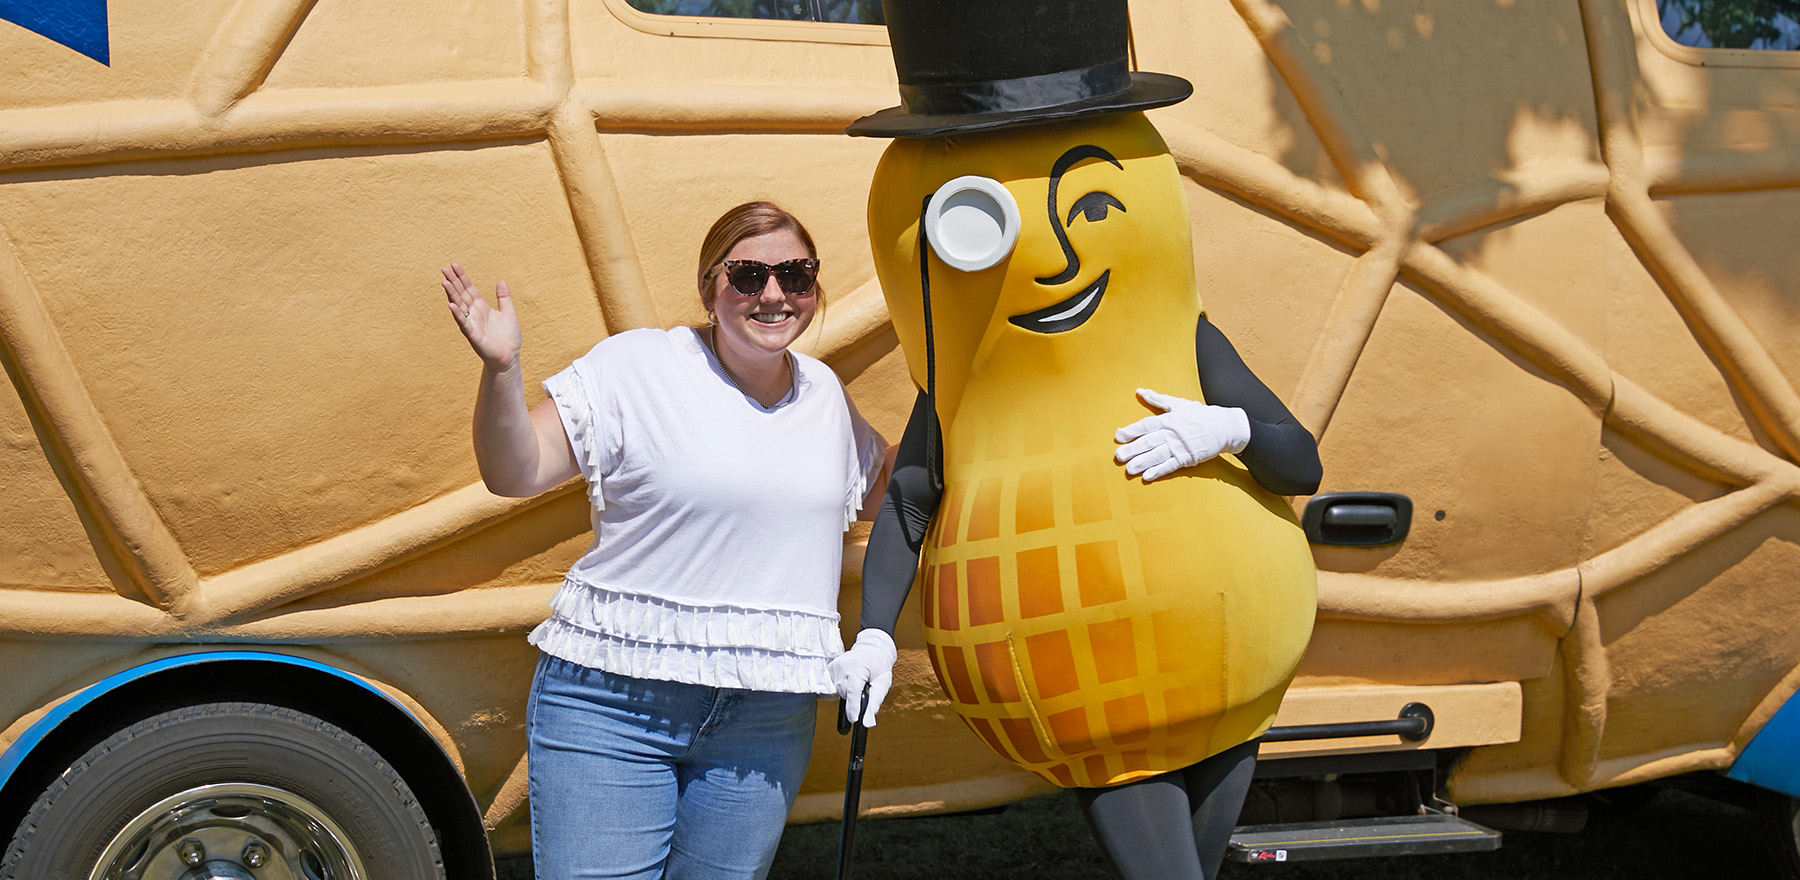 Mr Peanut standing with a woman wearing a white t-shirt in front of the Nutmobile